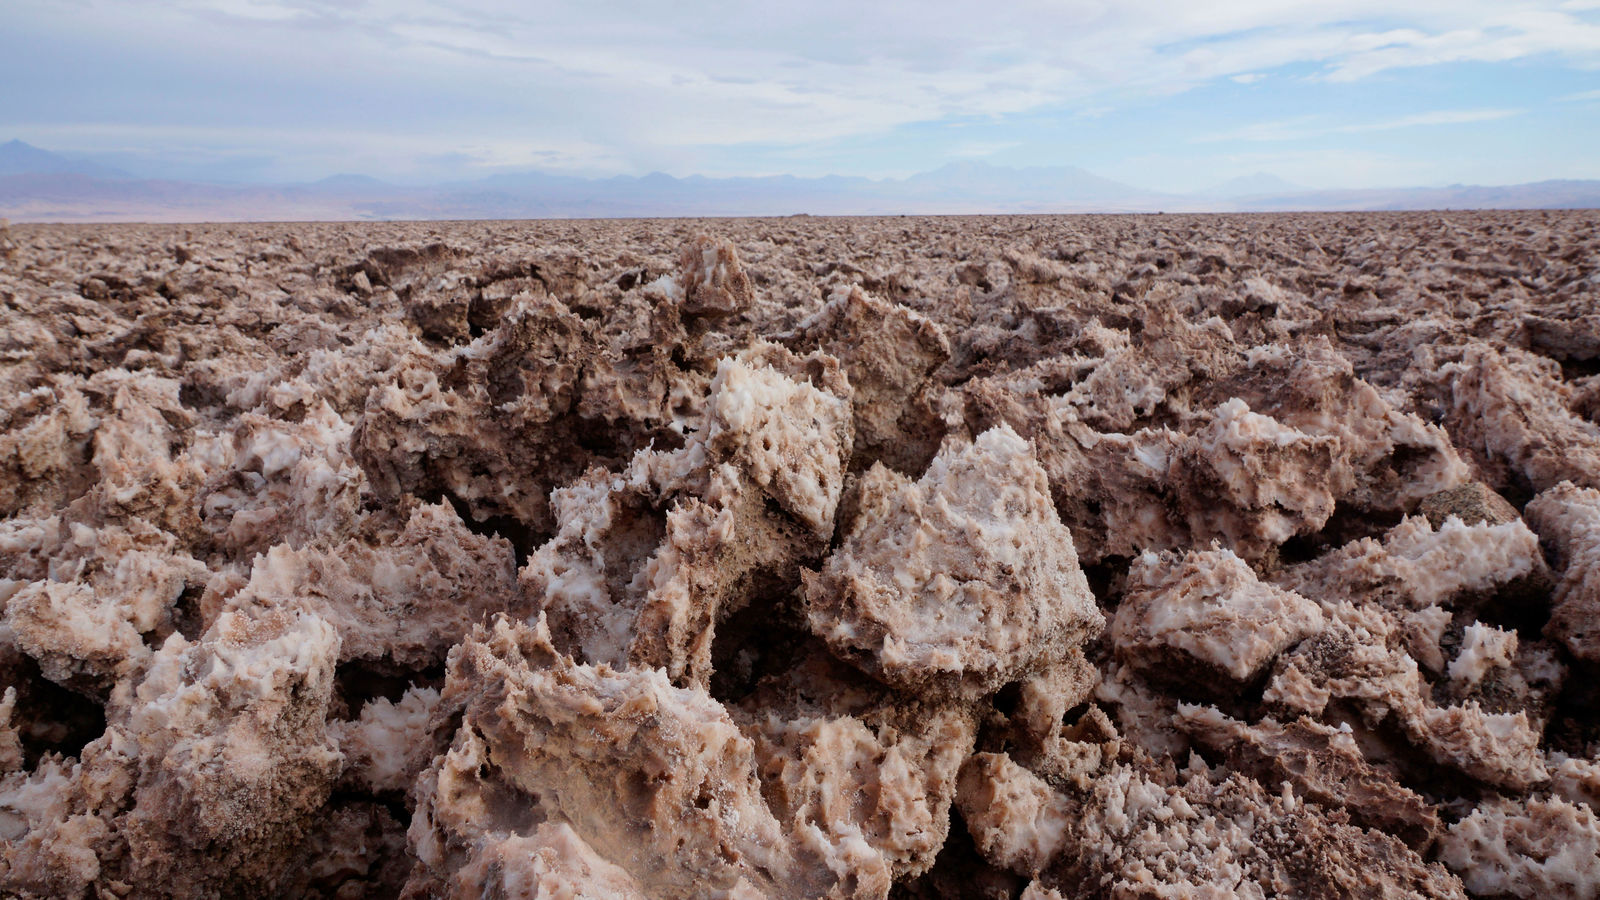 Story: "Lithium mining: What you should know about the contentious issue"